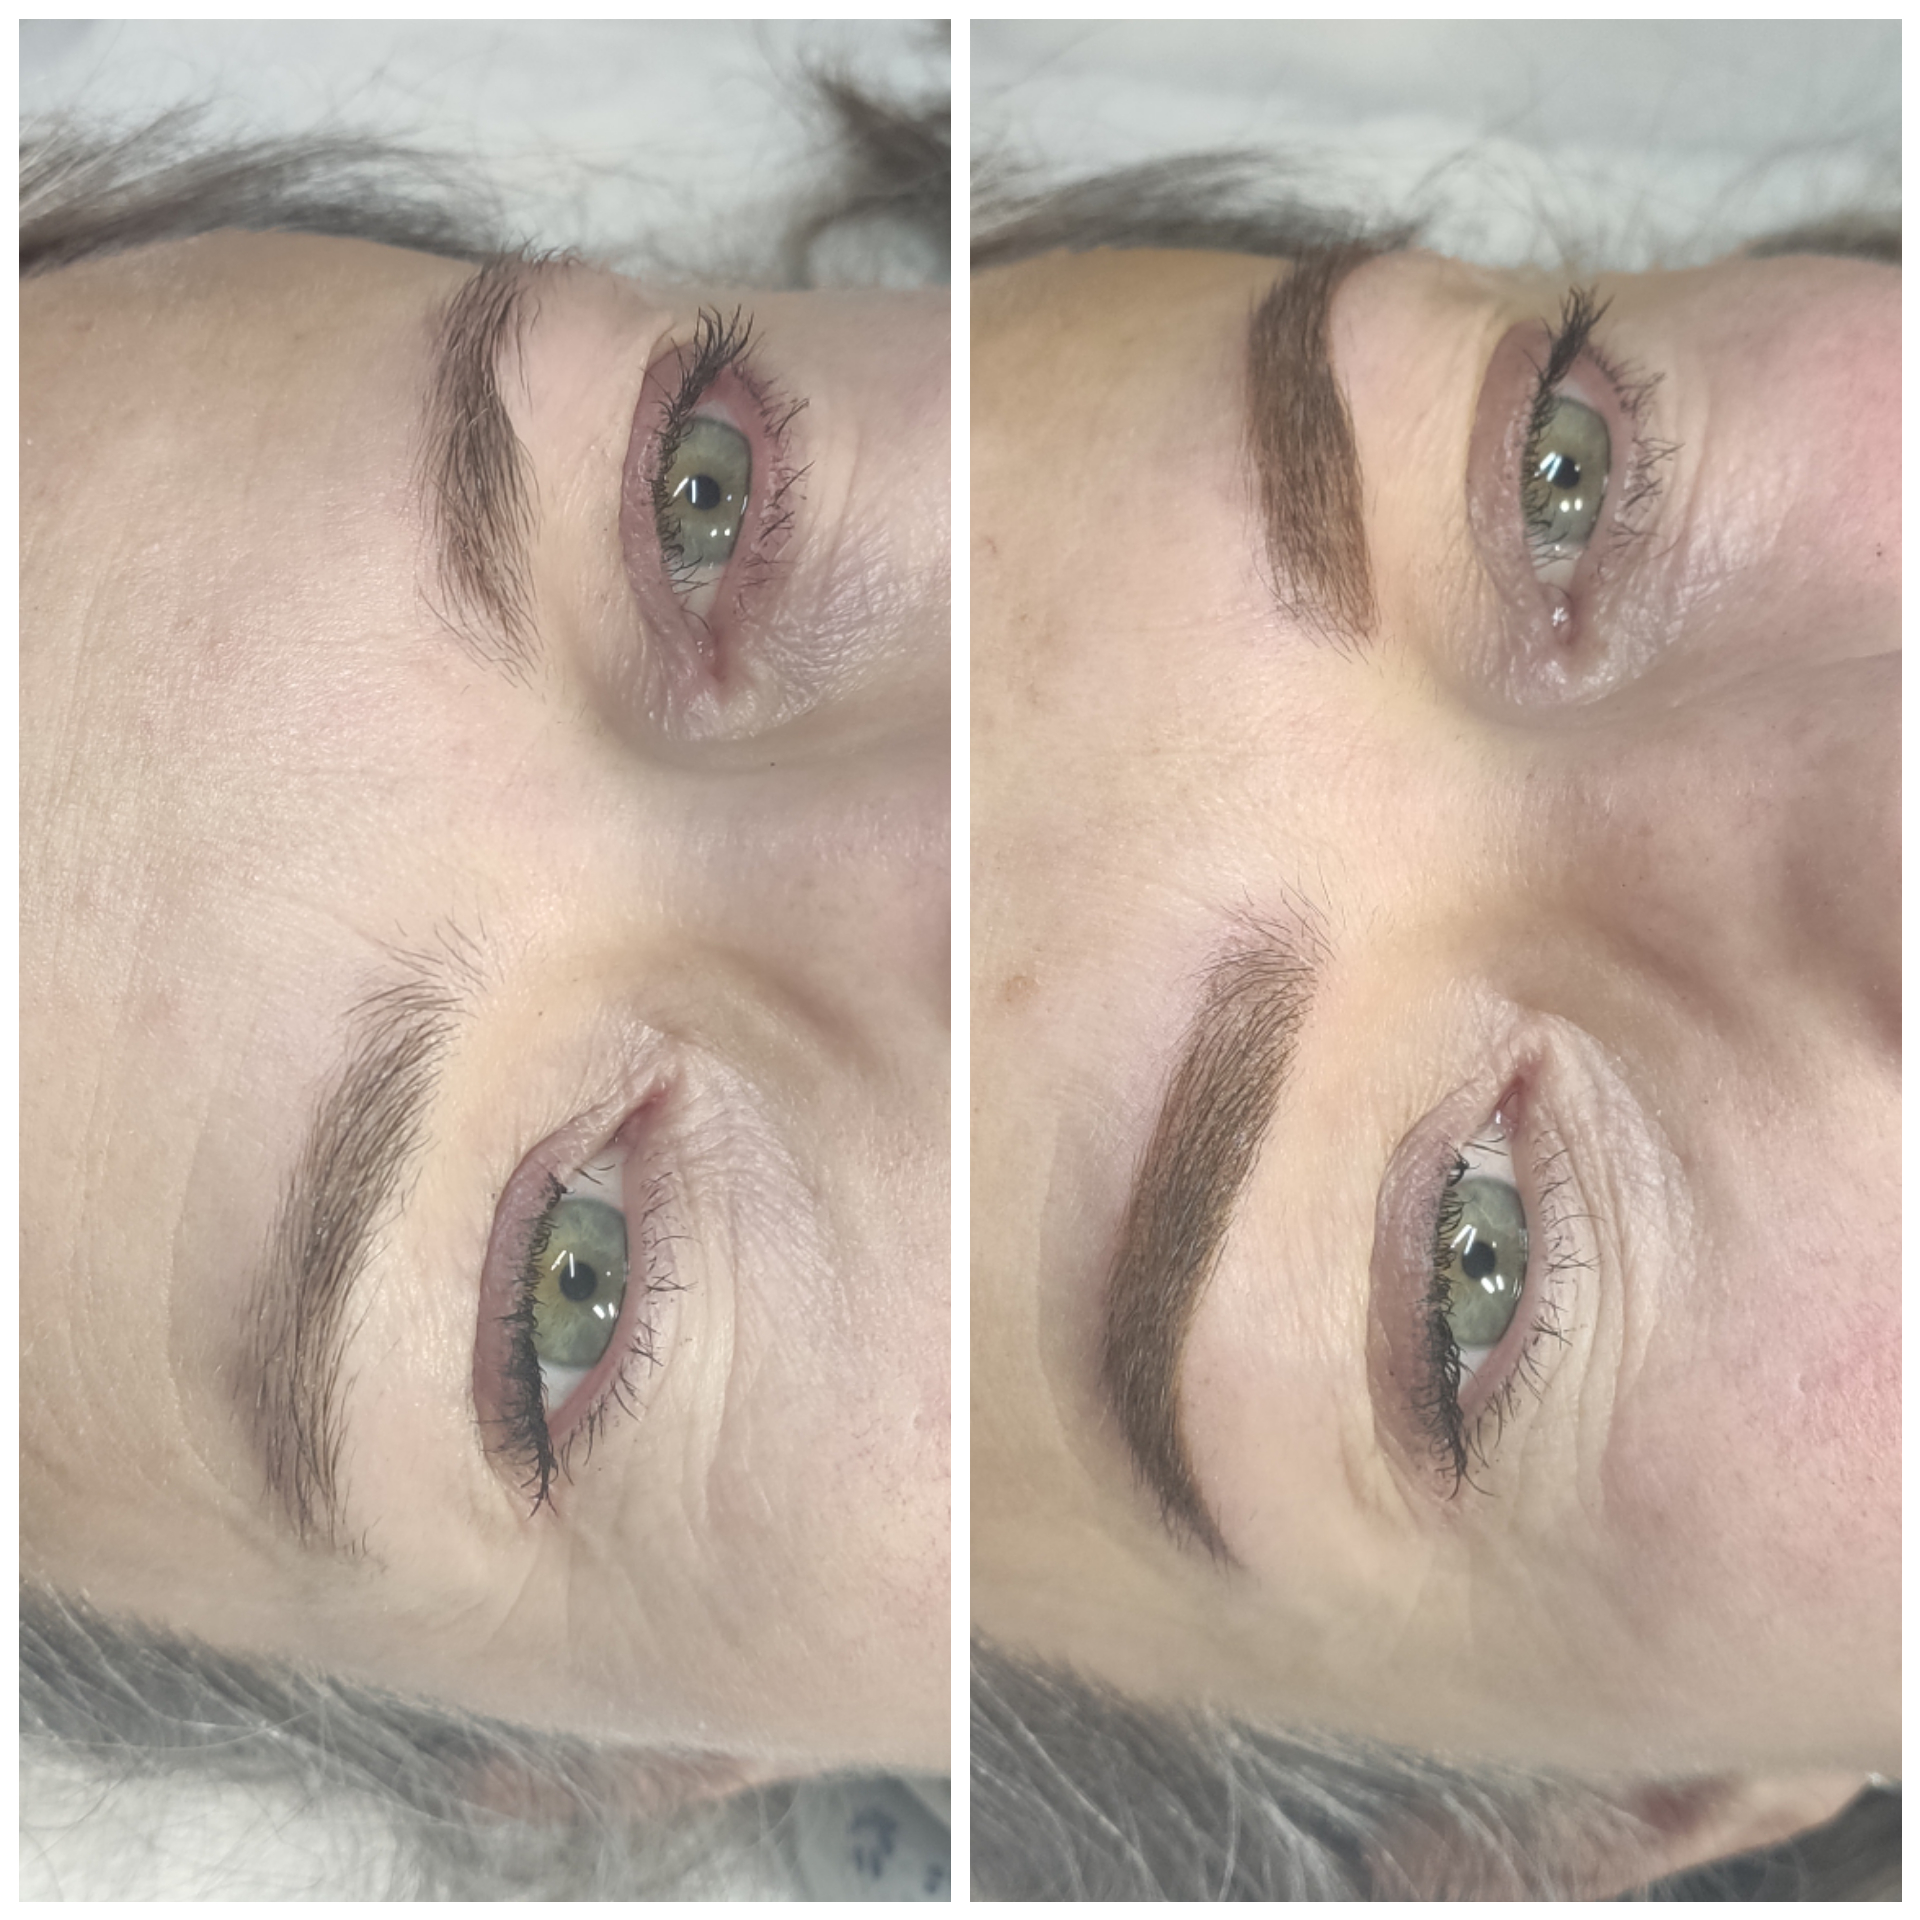 inCollage 20200103 173123759 - Powderbrows